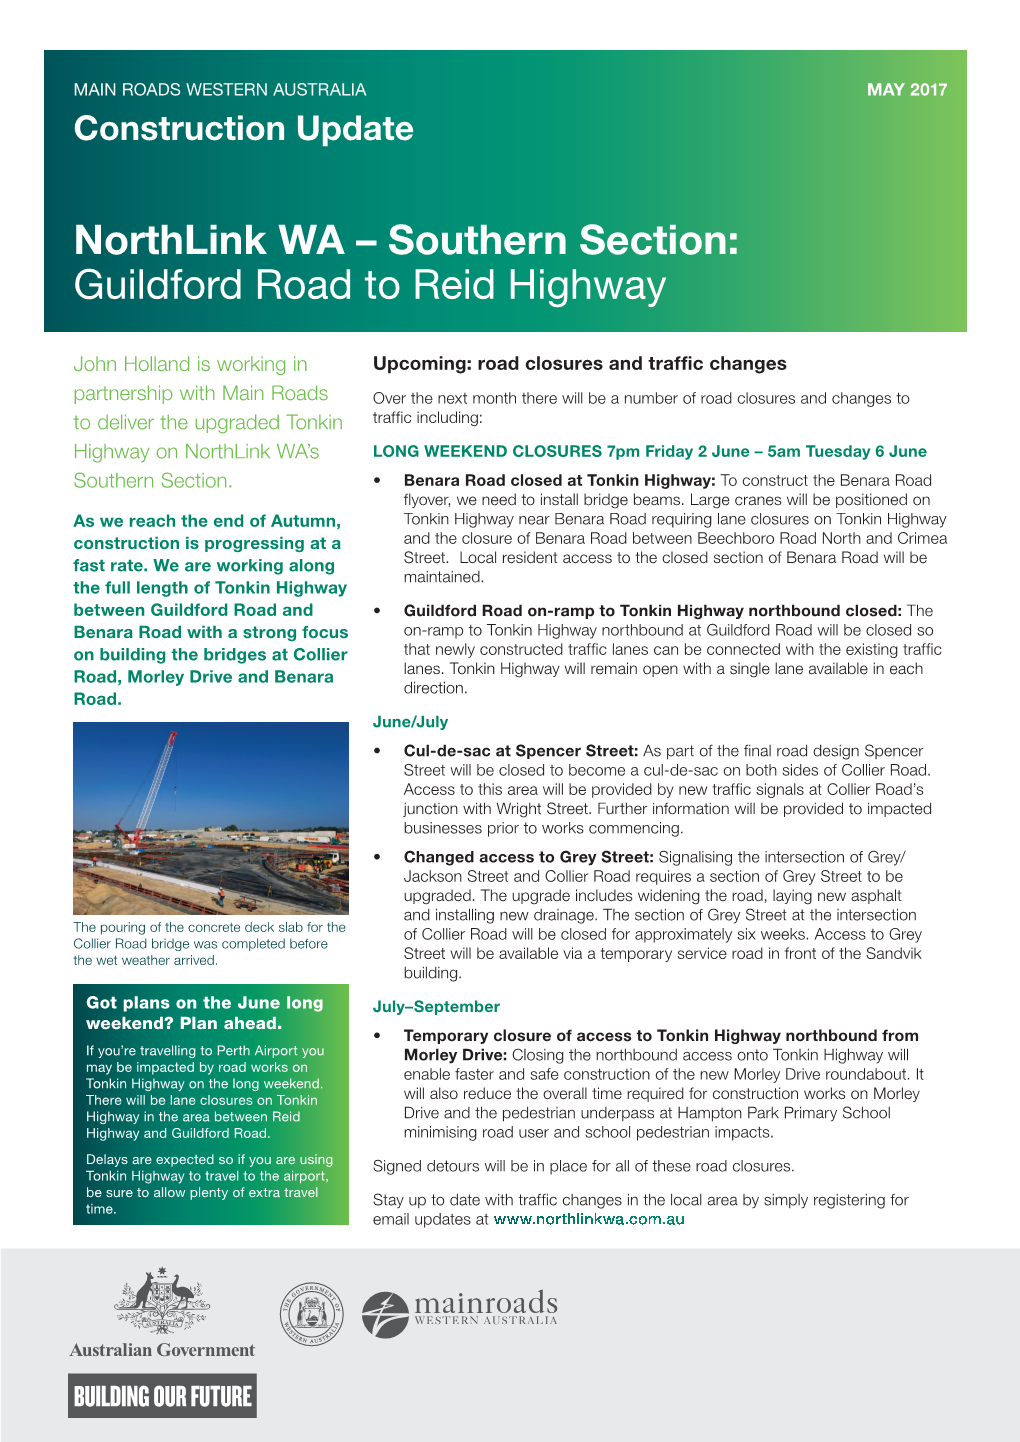 Northlink WA – Southern Section: Guildford Road to Reid Highway